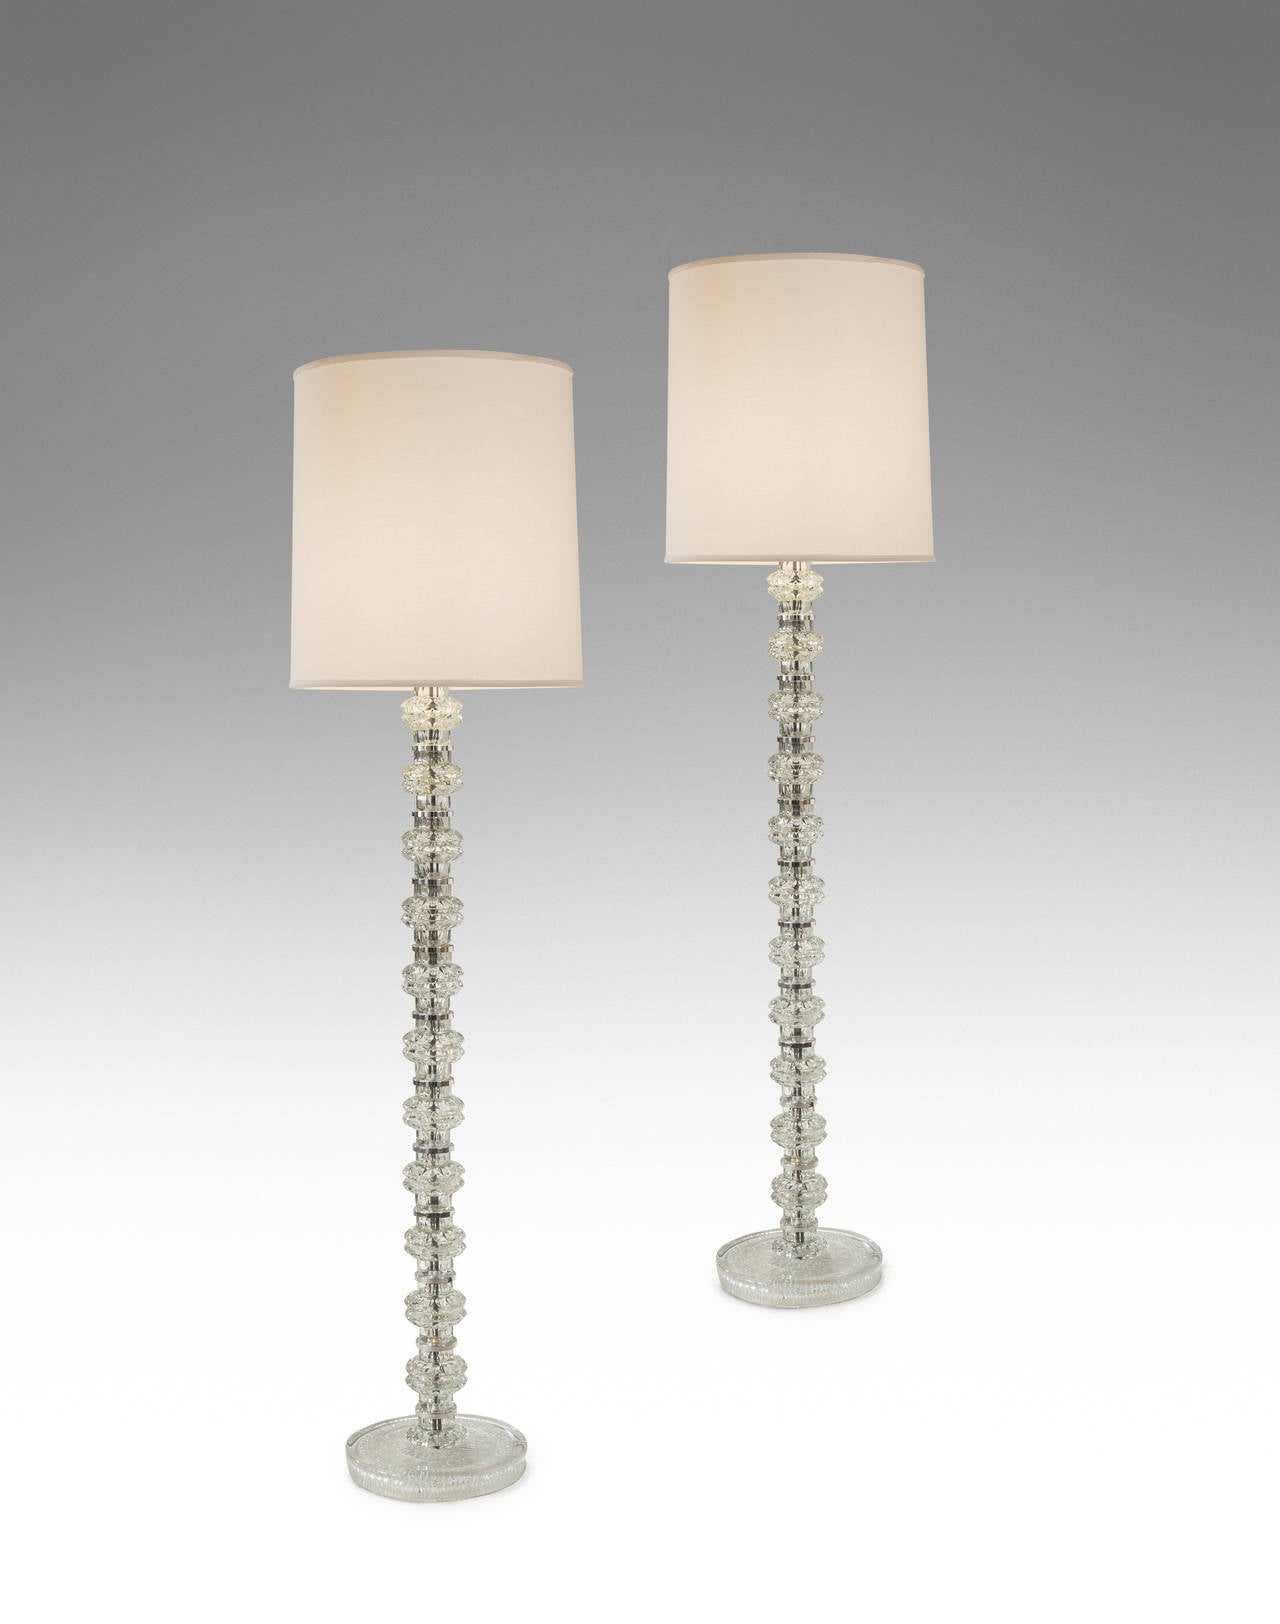 The delightfully complex, jewel like glass elements joined by silvered rings creating a remarkably powerful transparent standing lamp. Each standard composed of facetted glass sections, above a circular molded glass base, mid-20th century.